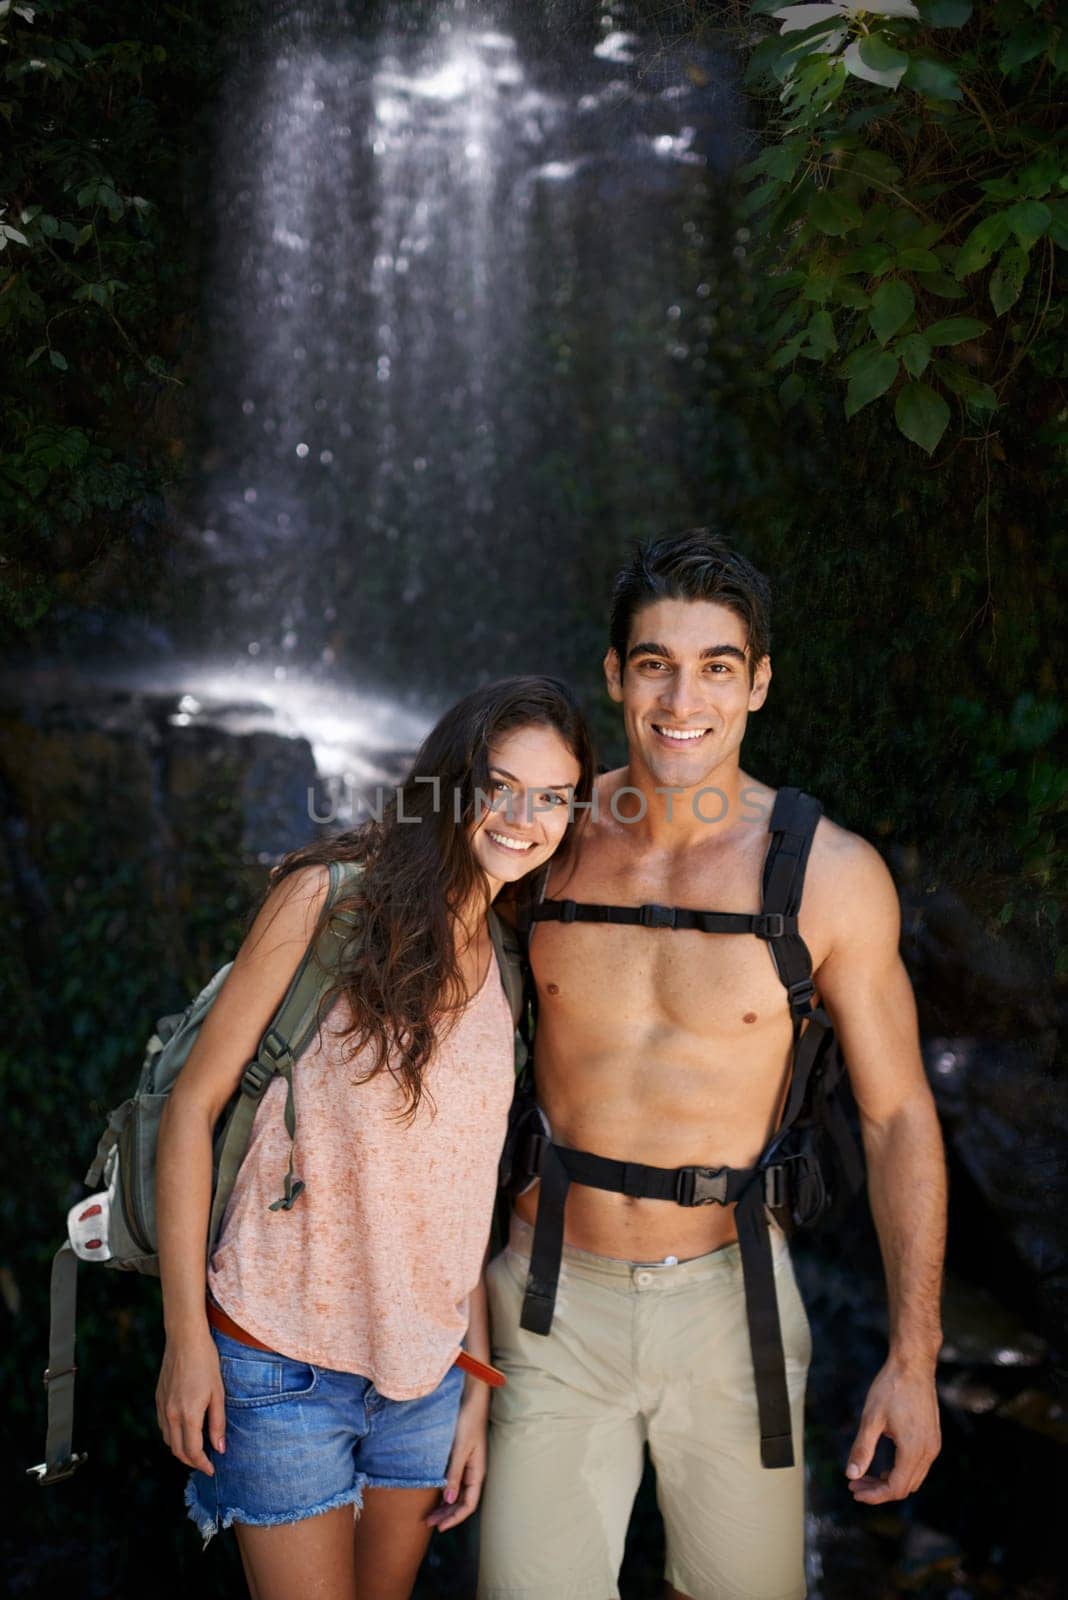 Hiking, waterfall or portrait of happy couple in nature for journey on outdoor trekking adventure. Man, woman or people on holiday vacation to relax in shade or woods for exercise, travel or wellness by YuriArcurs